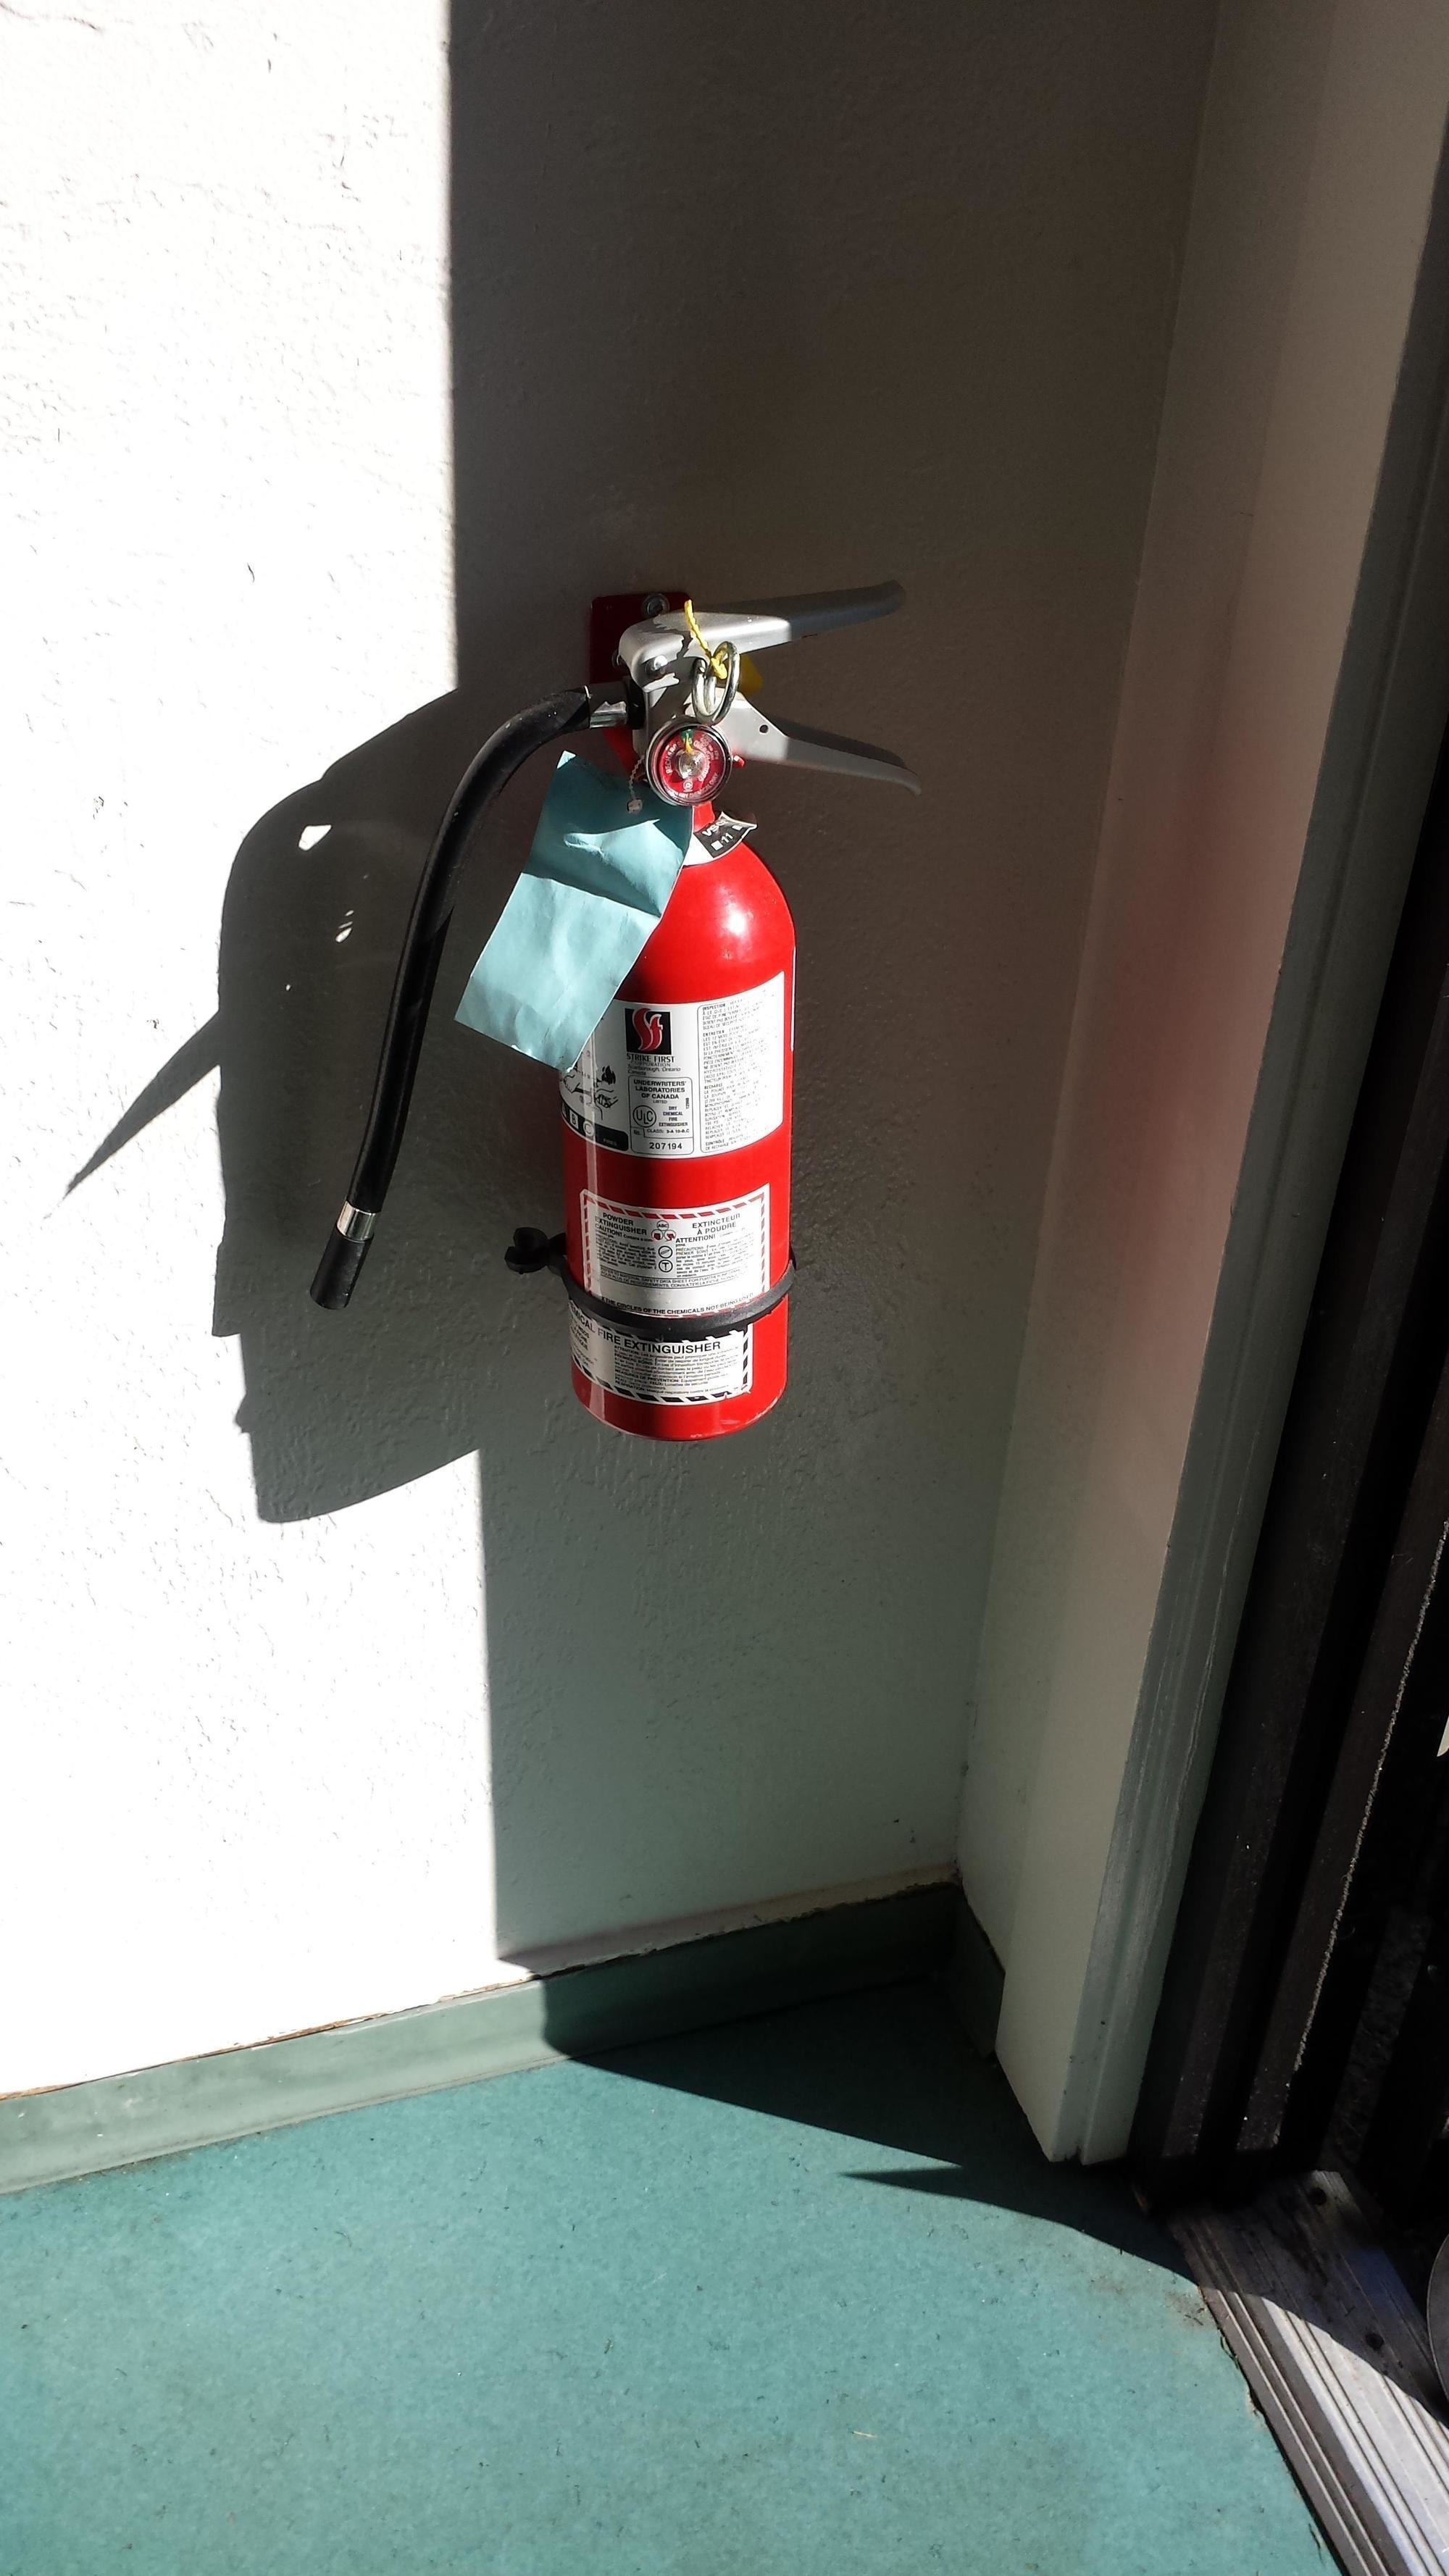 This fire extinguisher's shadow looks like a grouchy man's face.